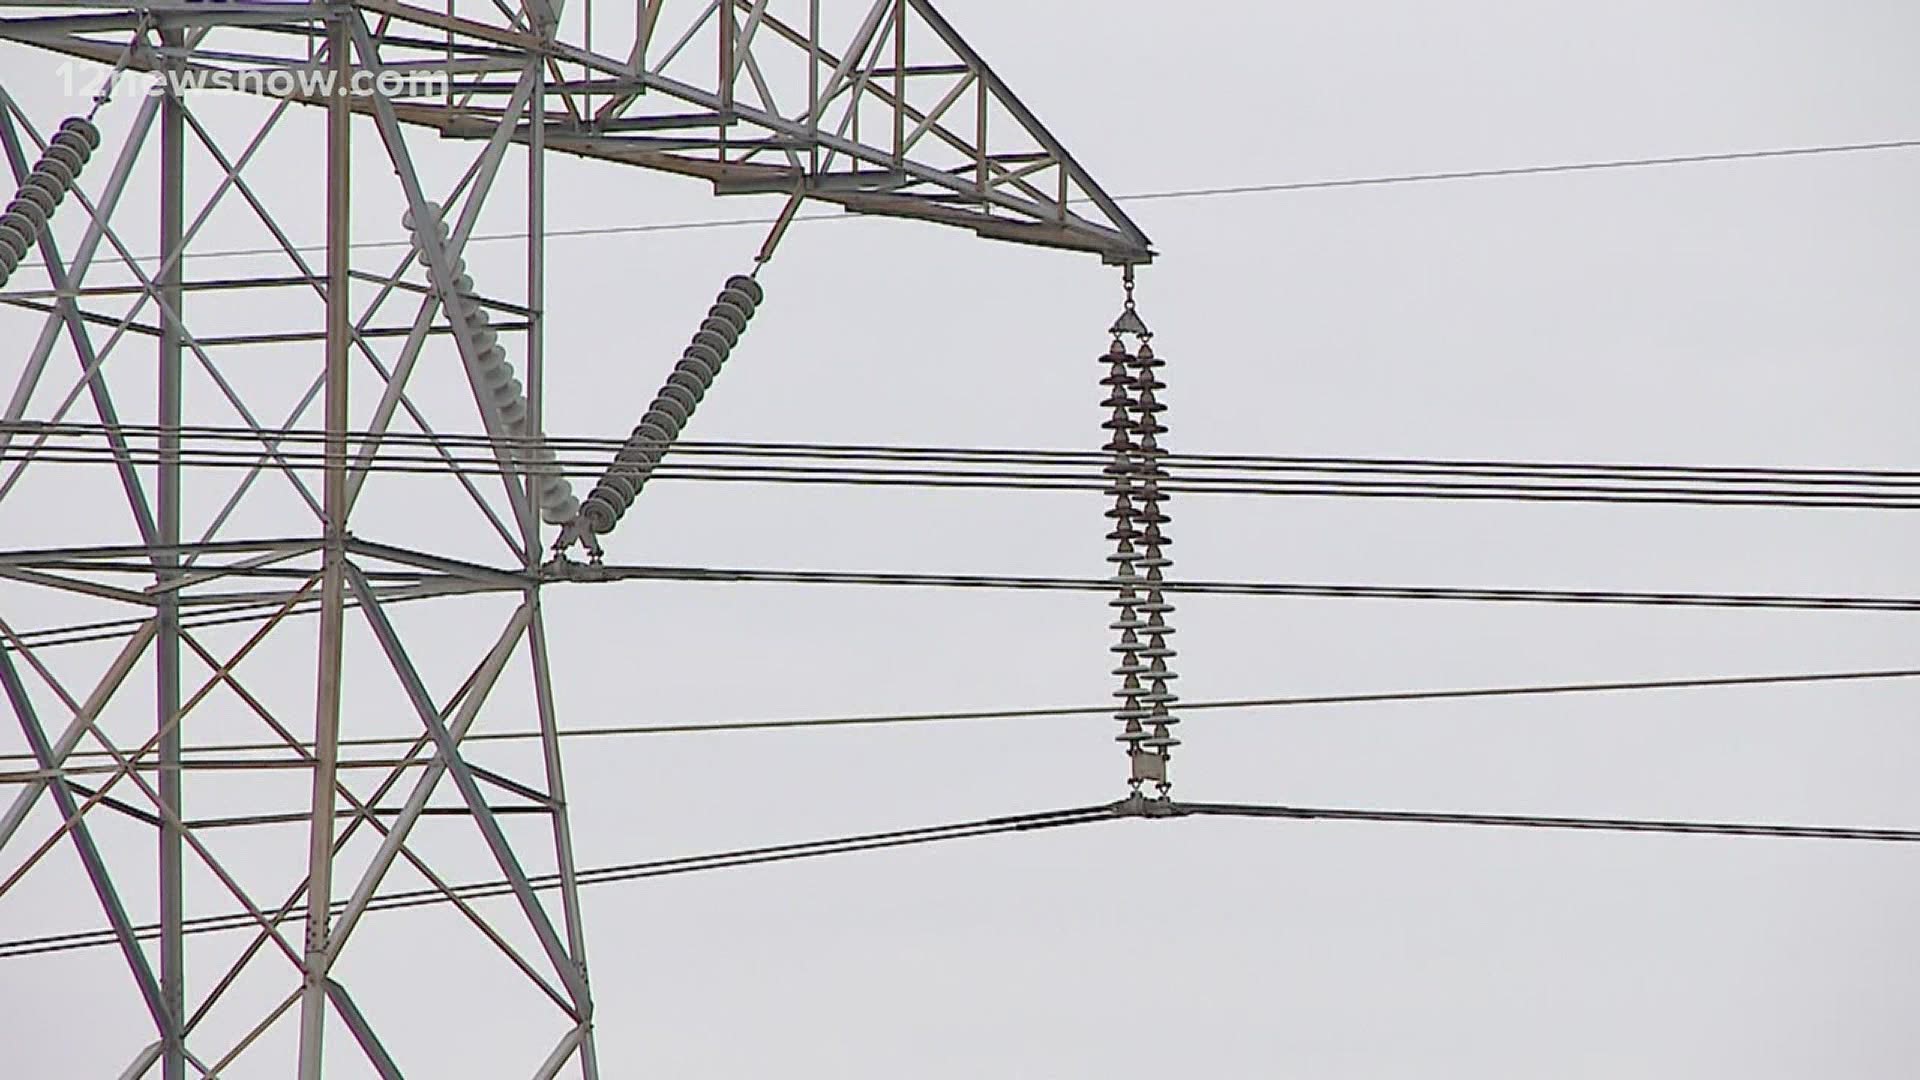 The blame is falling on electric companies that haven't winterized equipment.